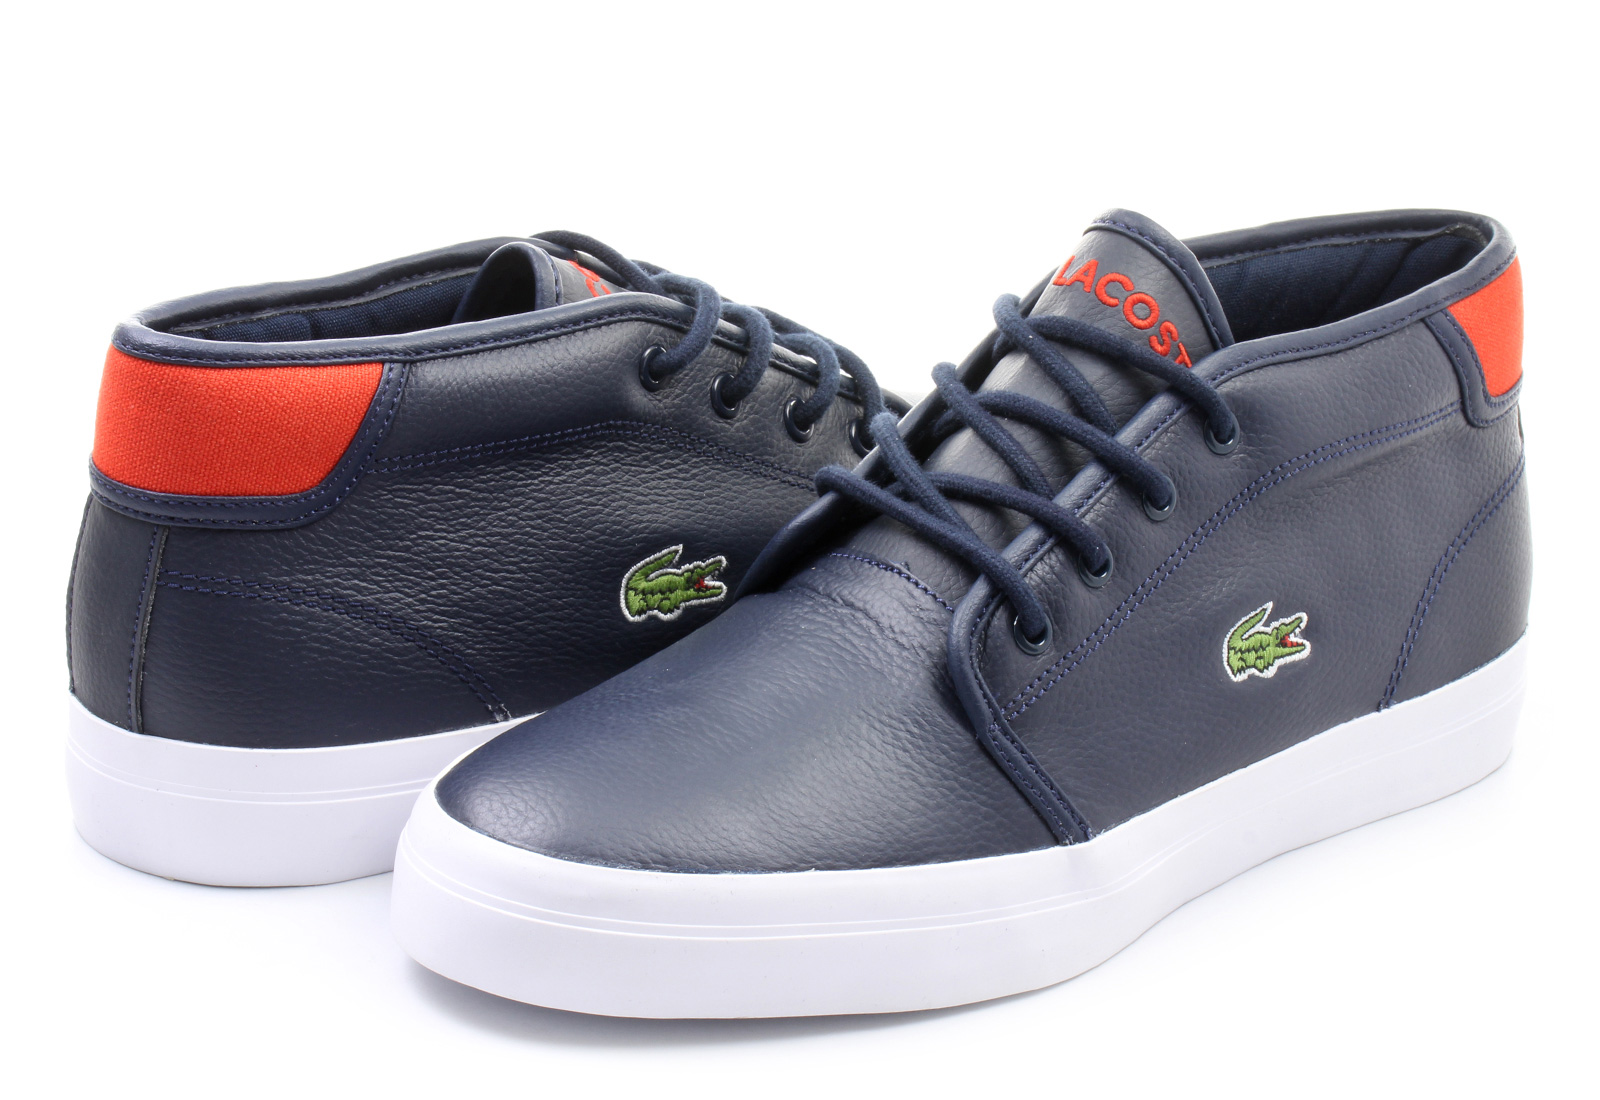 Lacoste Shoes - Ampthill Chunky - 153spm0001-db4 - Online shop for ...